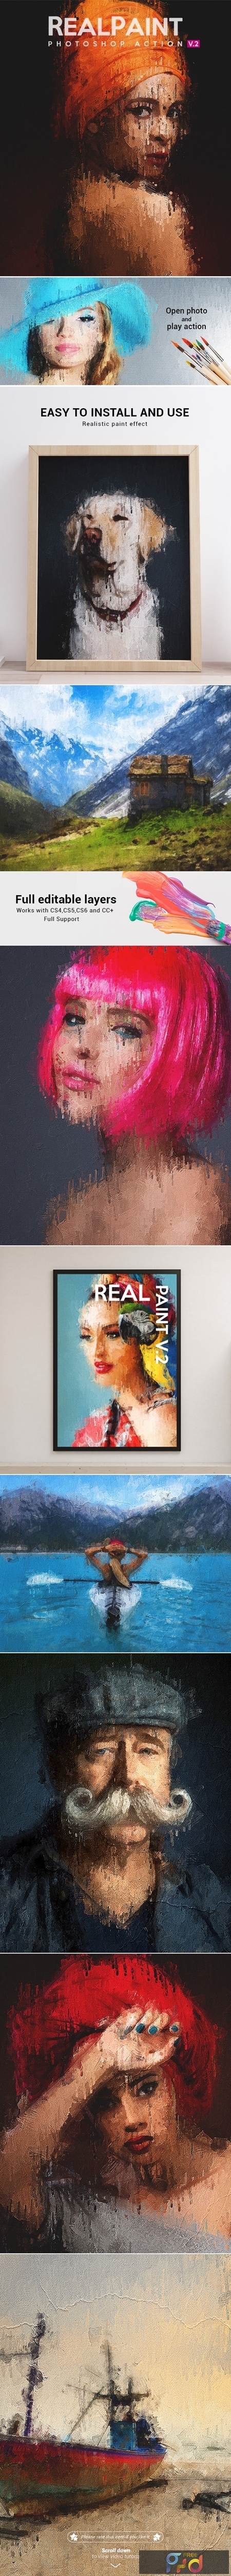 Real Paint V.2   Photoshop Action